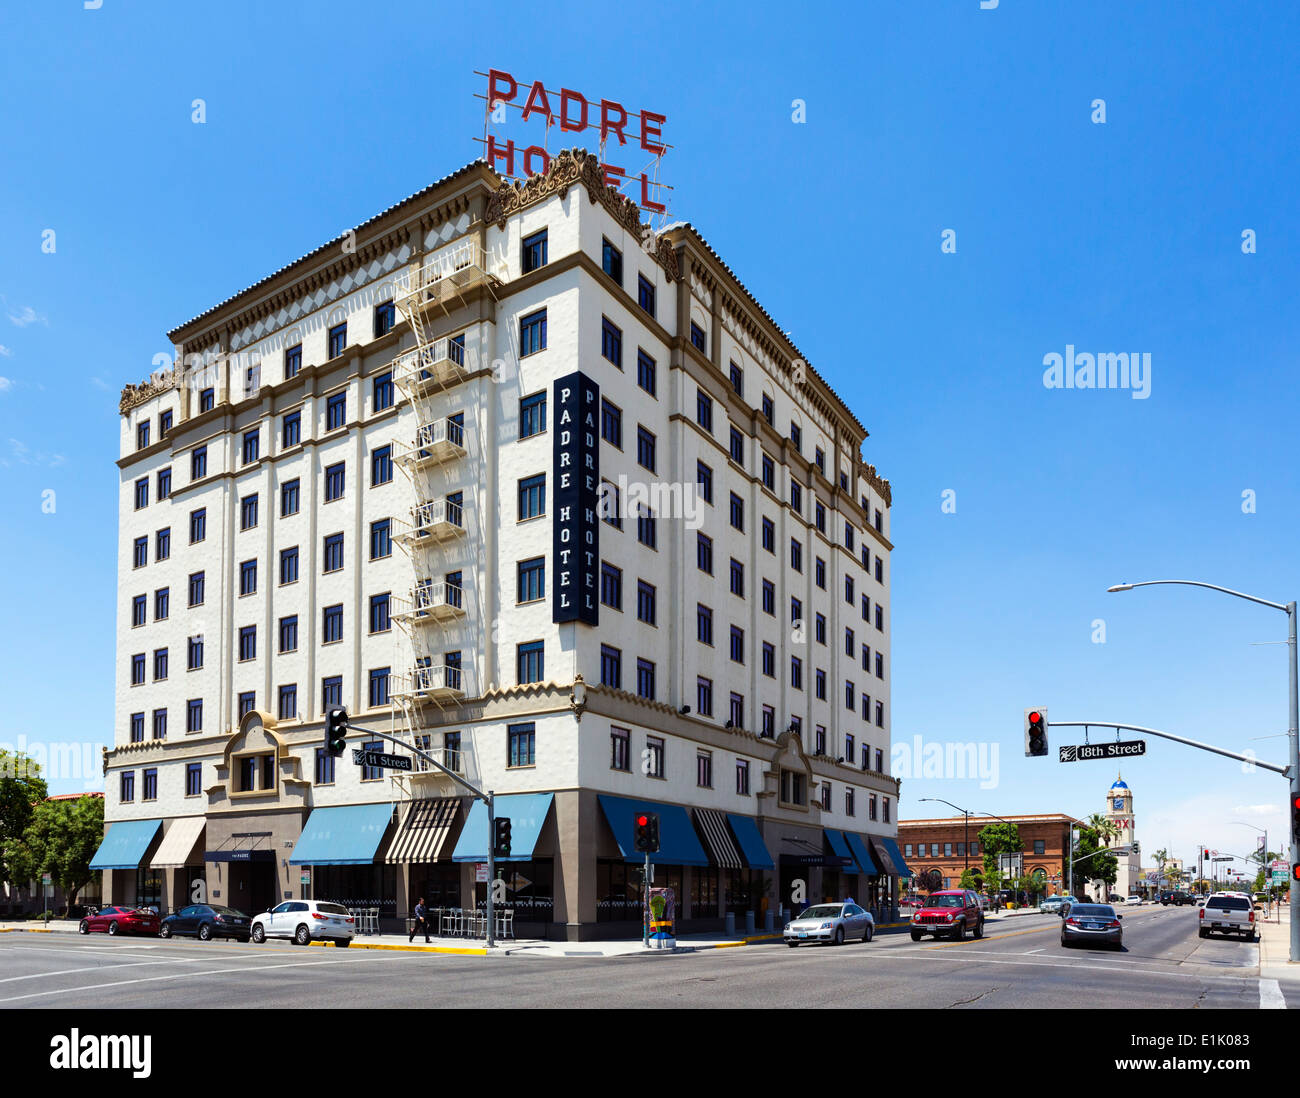 The historic Padre Hotel in downtown Bakersfield, Kern County, California, USA Stock Photo